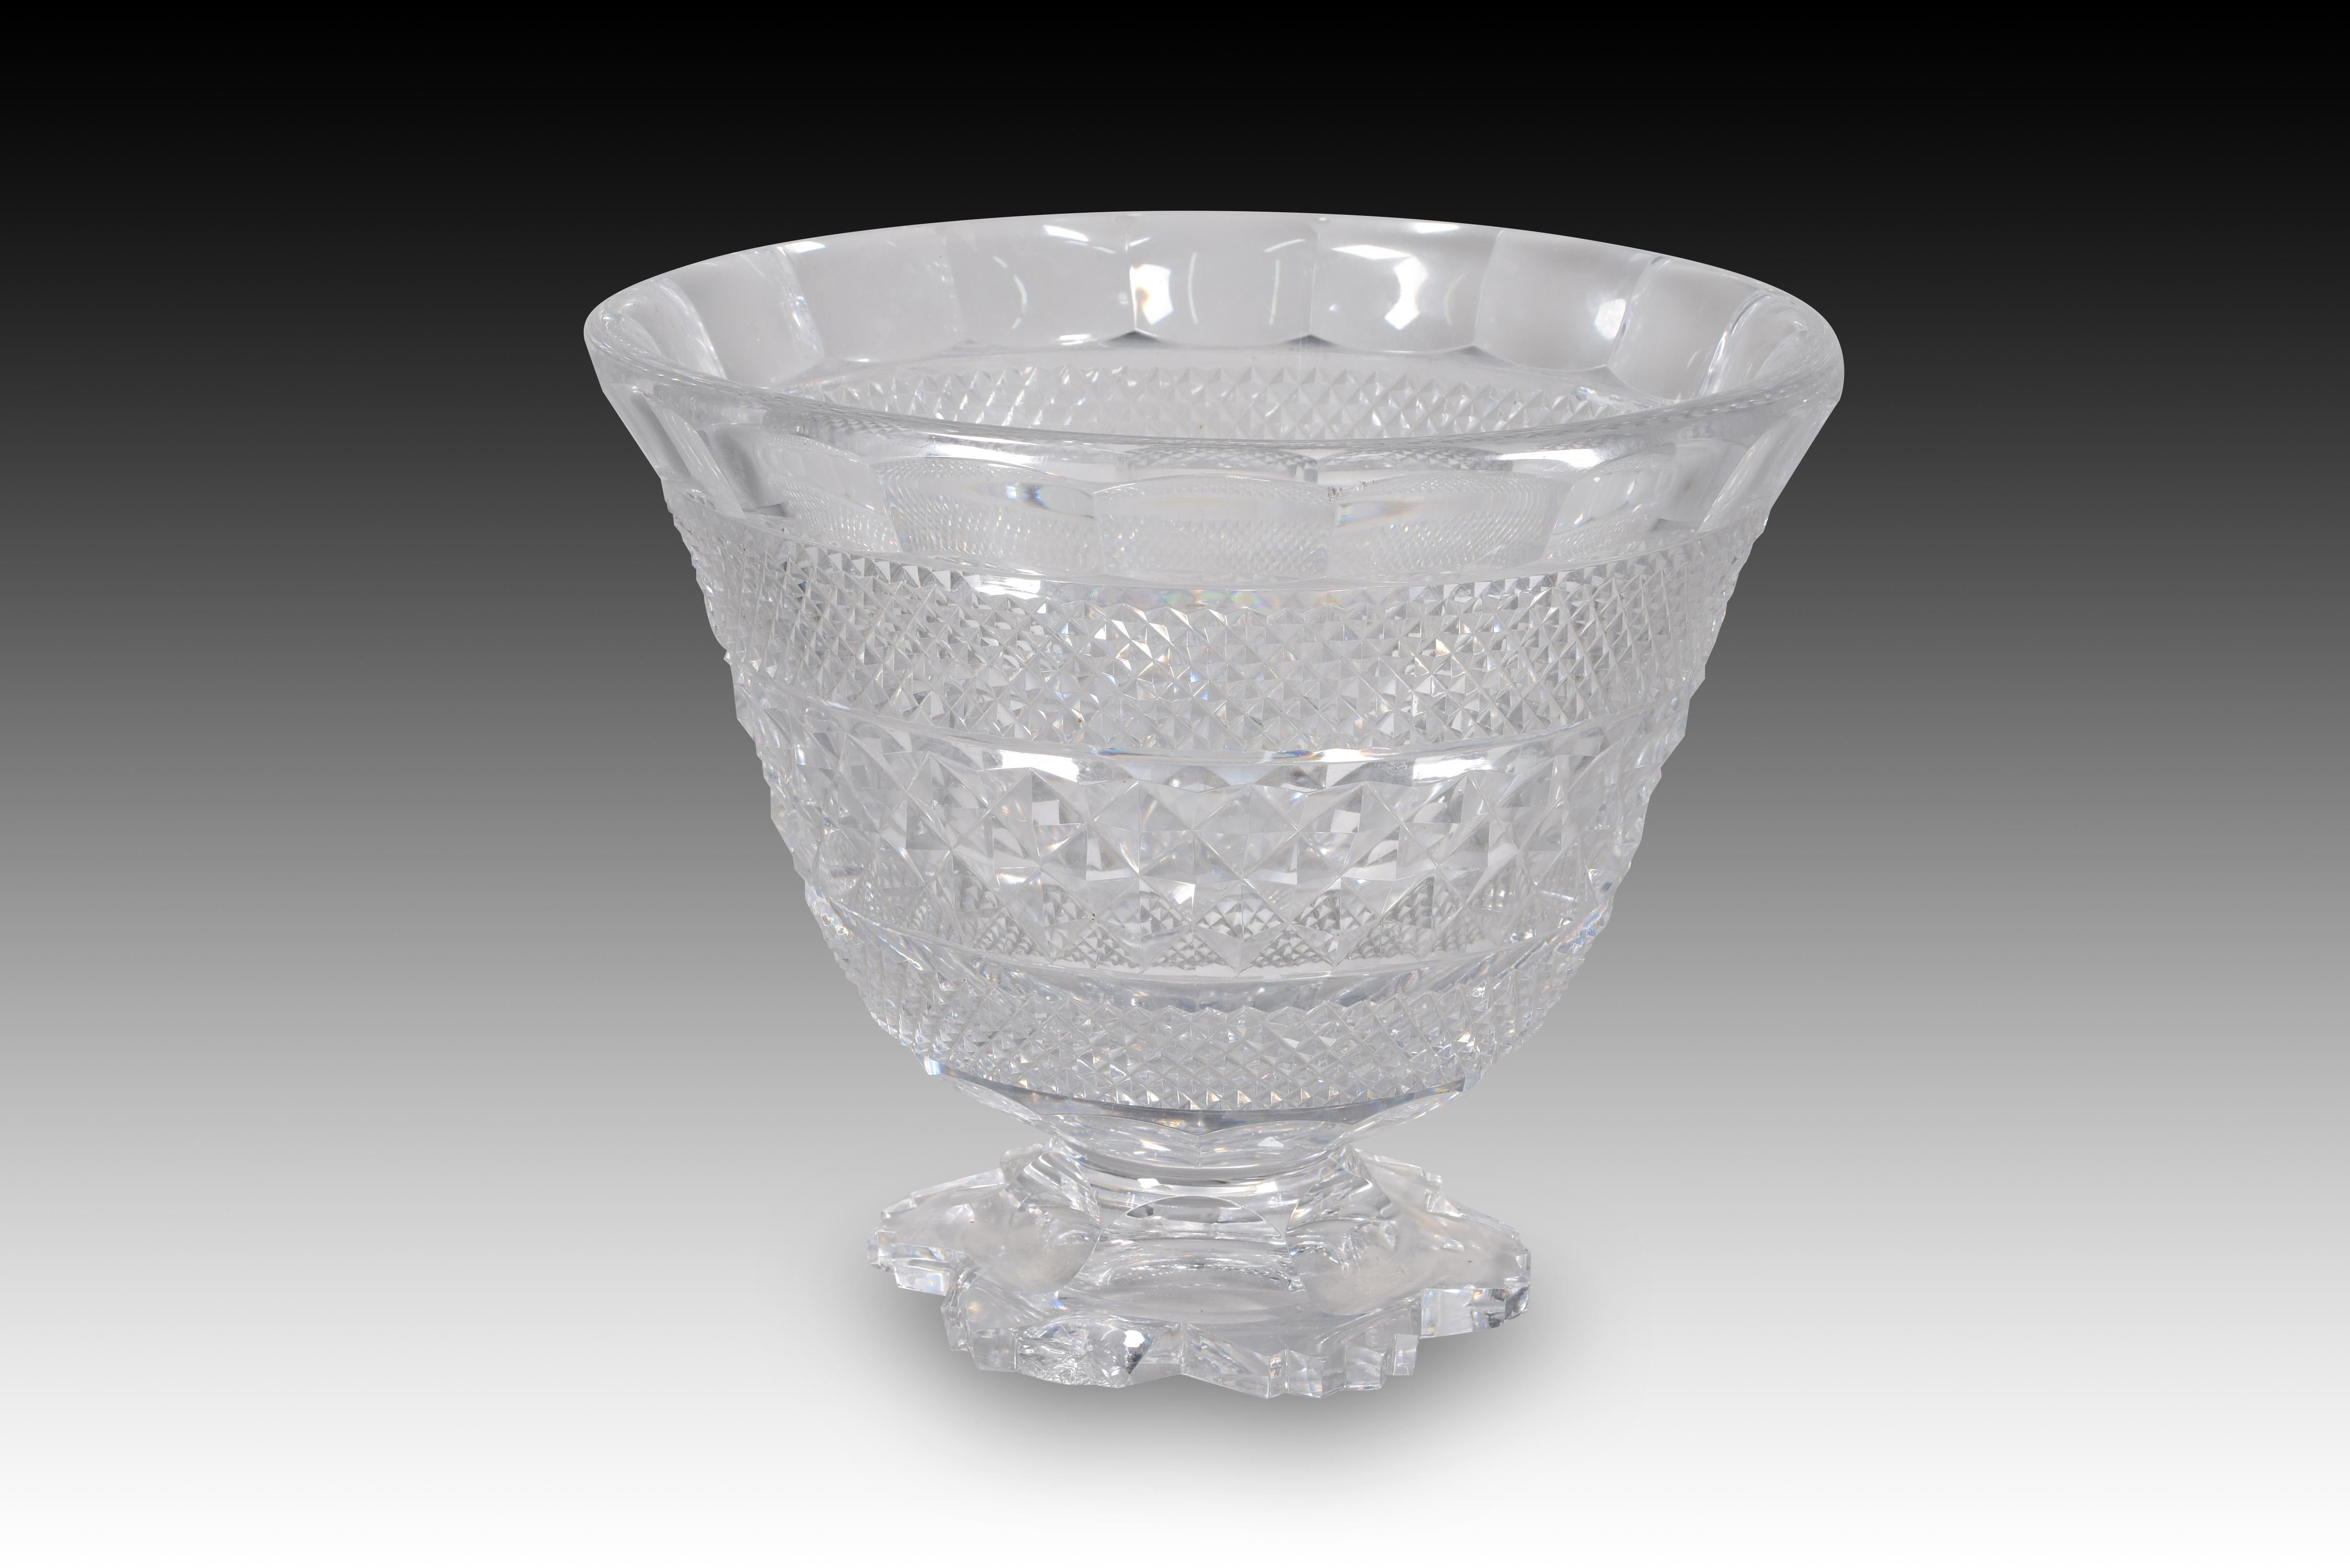 Centerpiece. Cut carved glass. Twentieth century. 
Has damage. 
Cup-shaped centerpiece made of clear cut glass with geometric elements on its outer surface. 
Weight: 12kg. · Size: 33x33x26 cms

